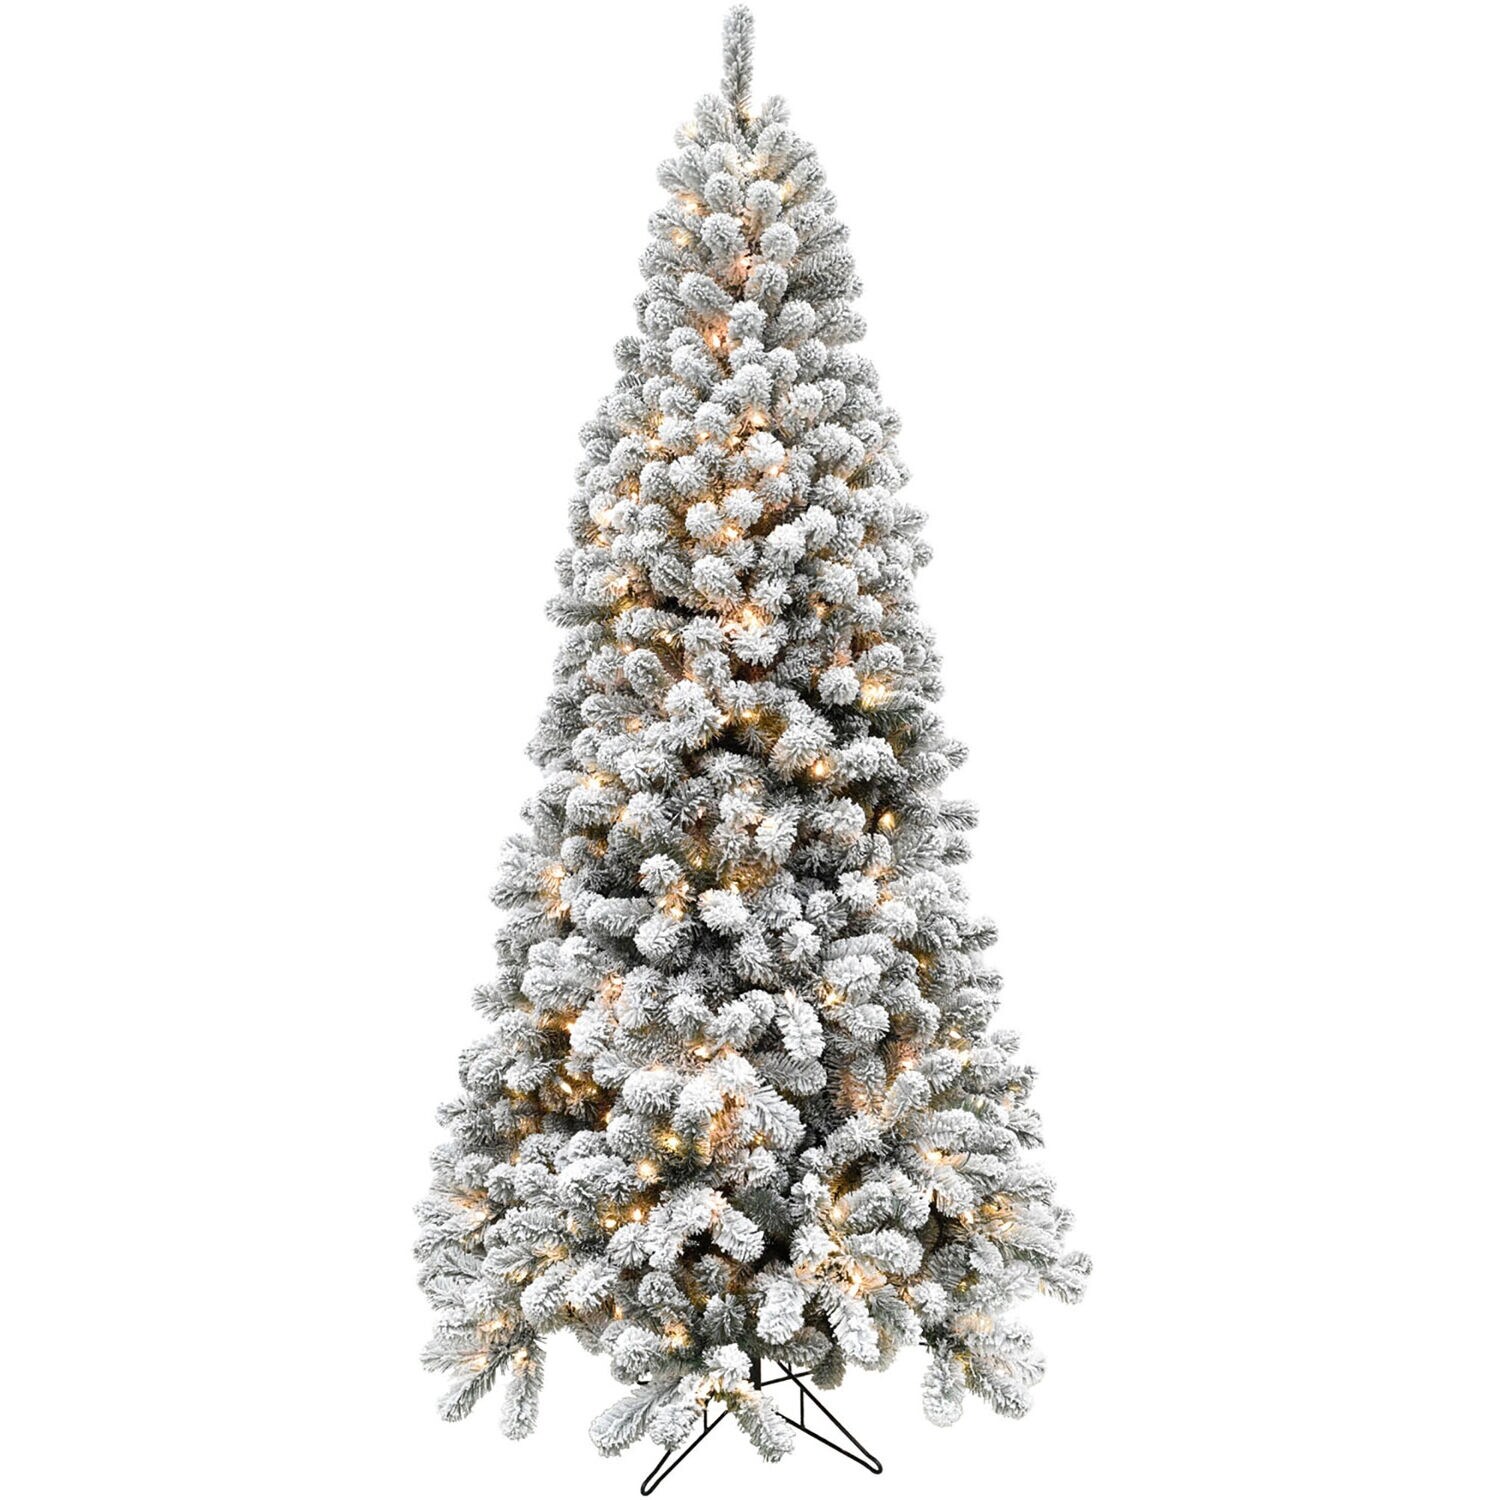 Skylar Snow Flocked Christmas Tree Prelit, Realistic Alaskan Pine Frosted Christmas Tree with Lights by Naomi Home - Snow Flocked,7.5ft